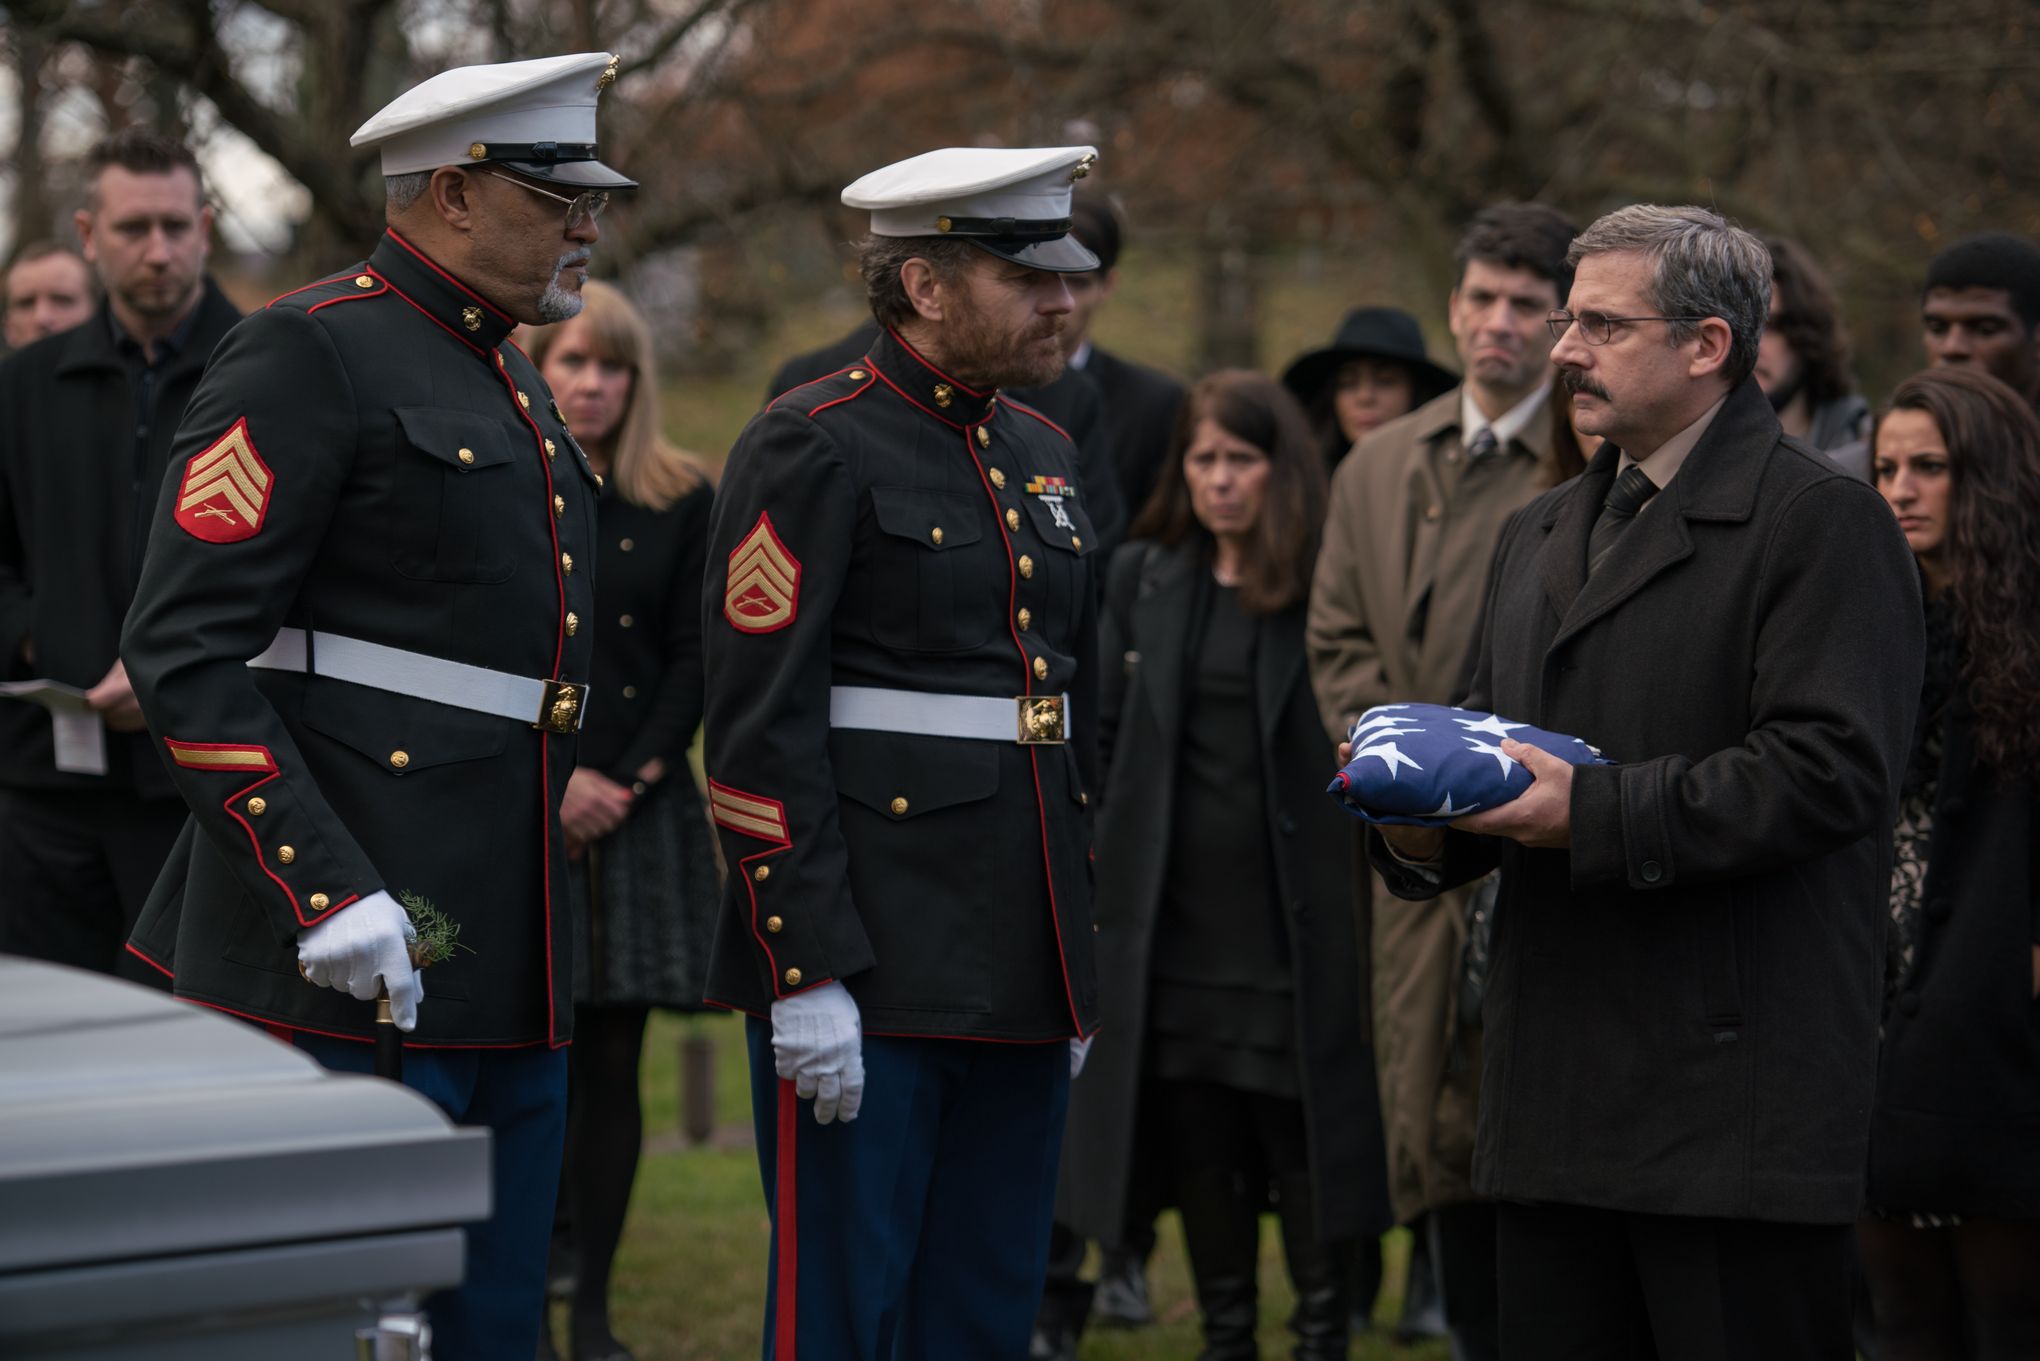 Last Flag Flying' review: Heartfelt war tale tells of a father's loss